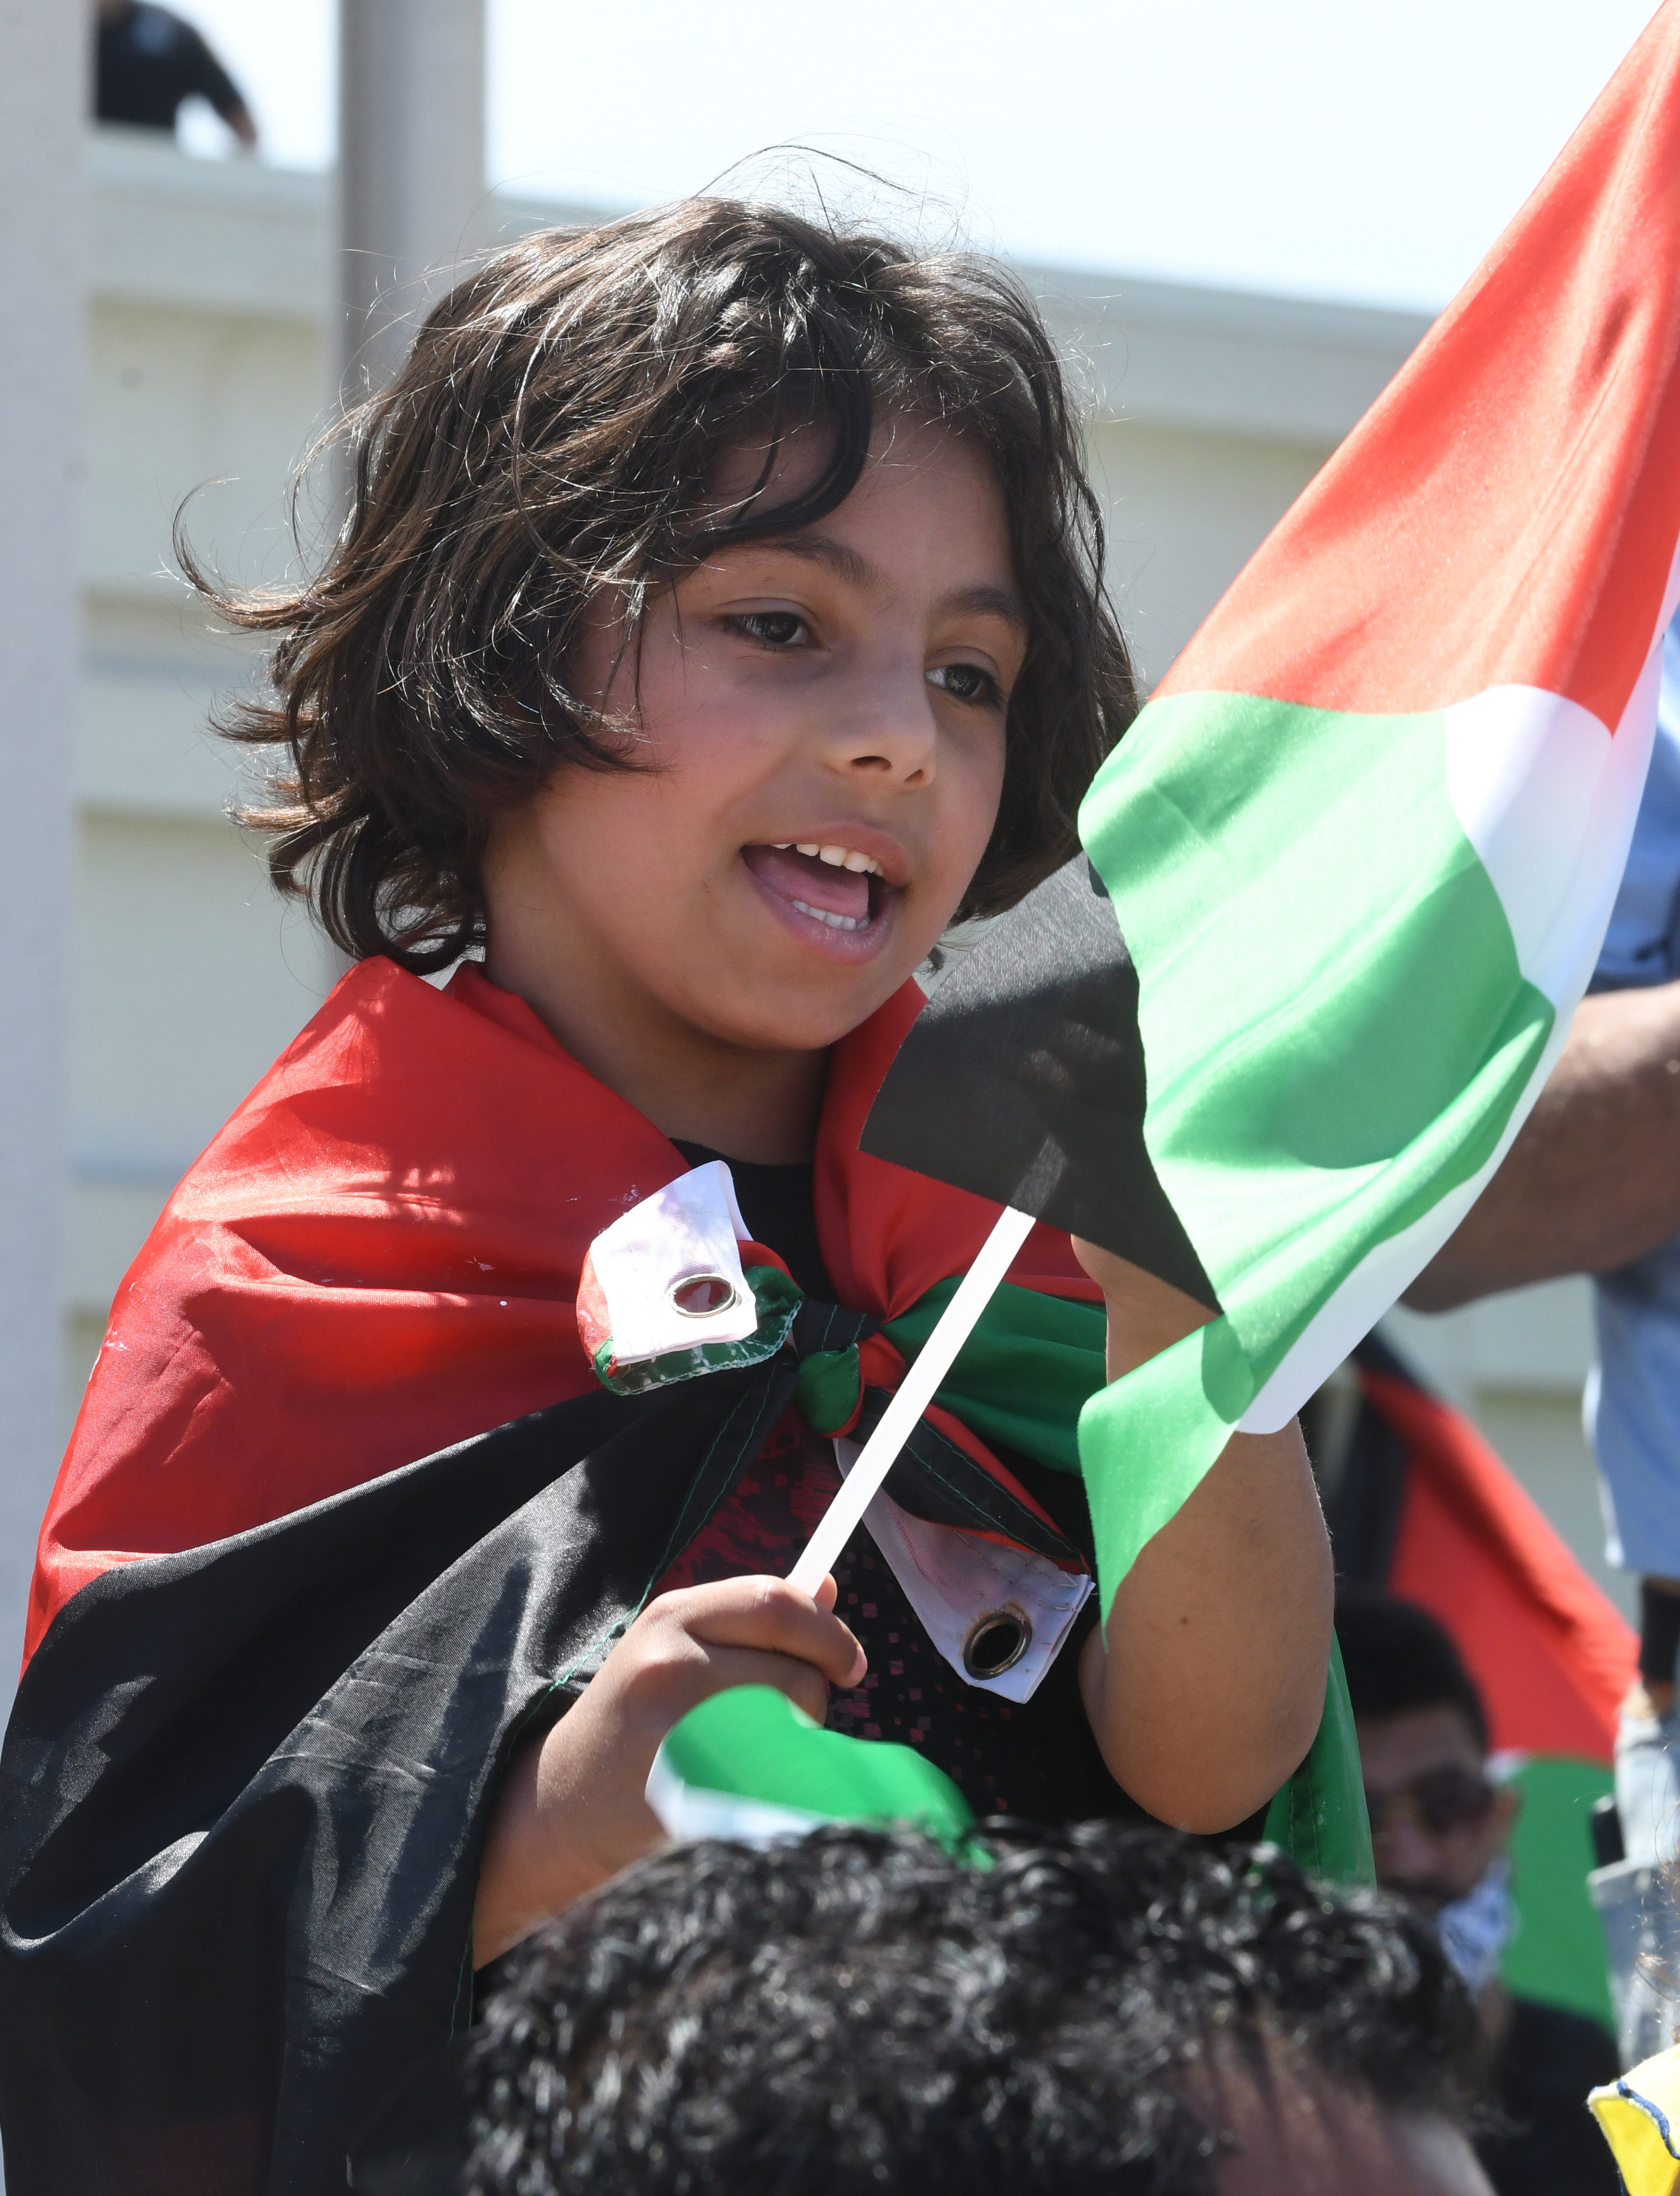 A young boy wrapped in a Palestinian flag during a Palestinian protest and march, at the same time President Joe Biden is visiting in another part of Dearborn, Michigan on May 18, 2021.